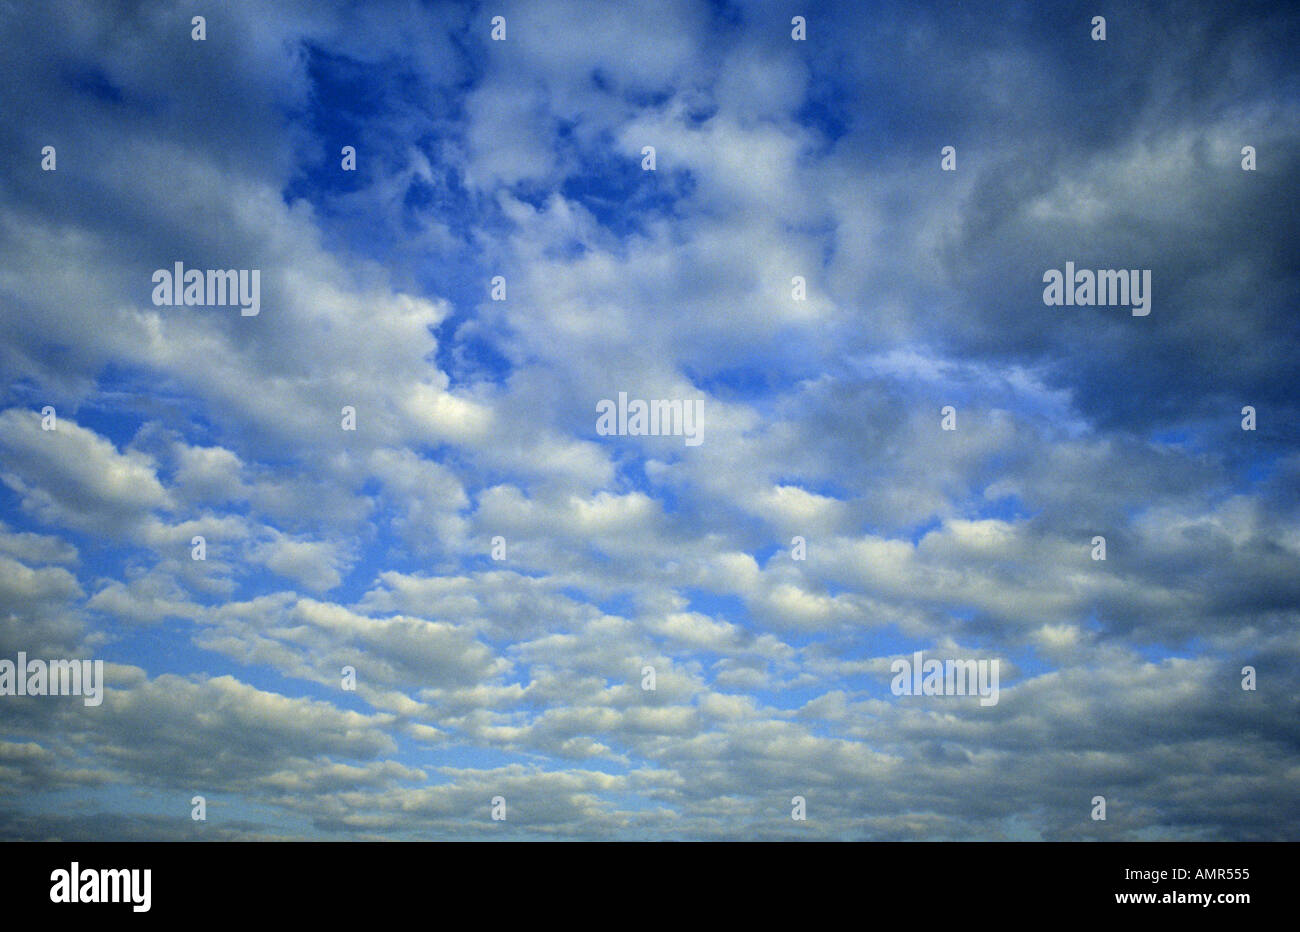 altocumulus cloud formation daytime Stock Photo